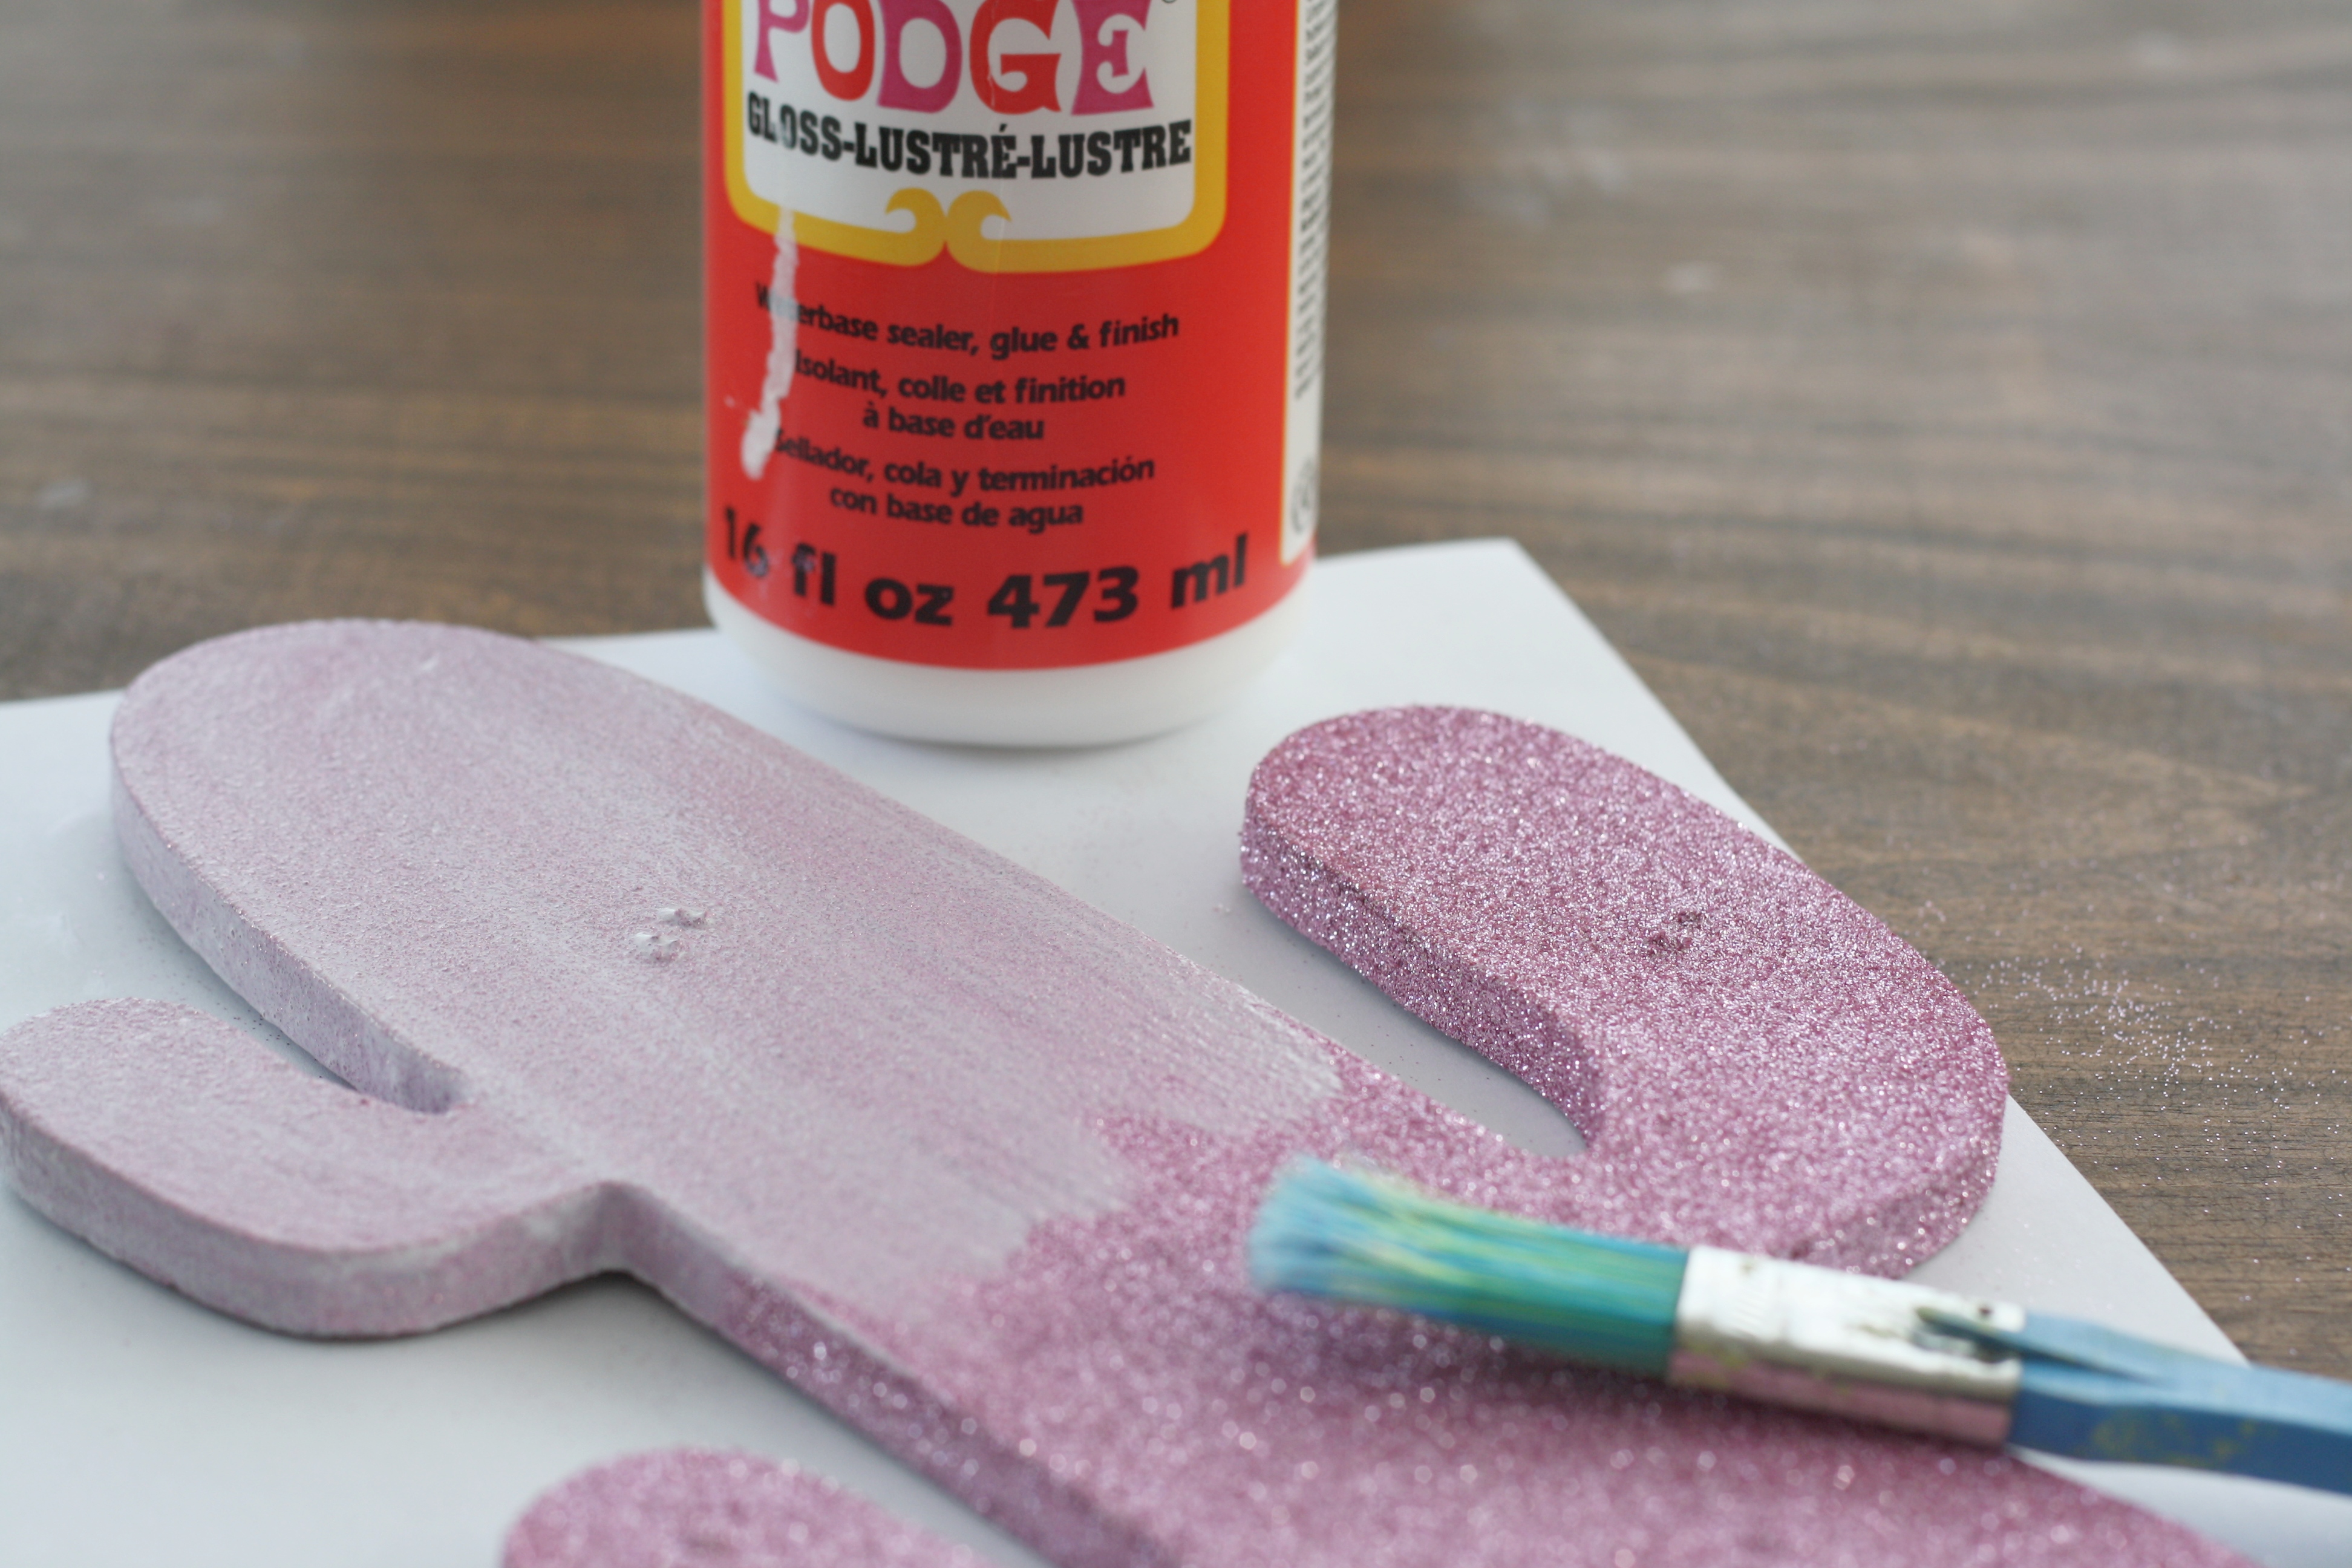 Incubus Kæledyr maternal How to Seal Glitter using Mod Podge - Makes, Bakes and Decor